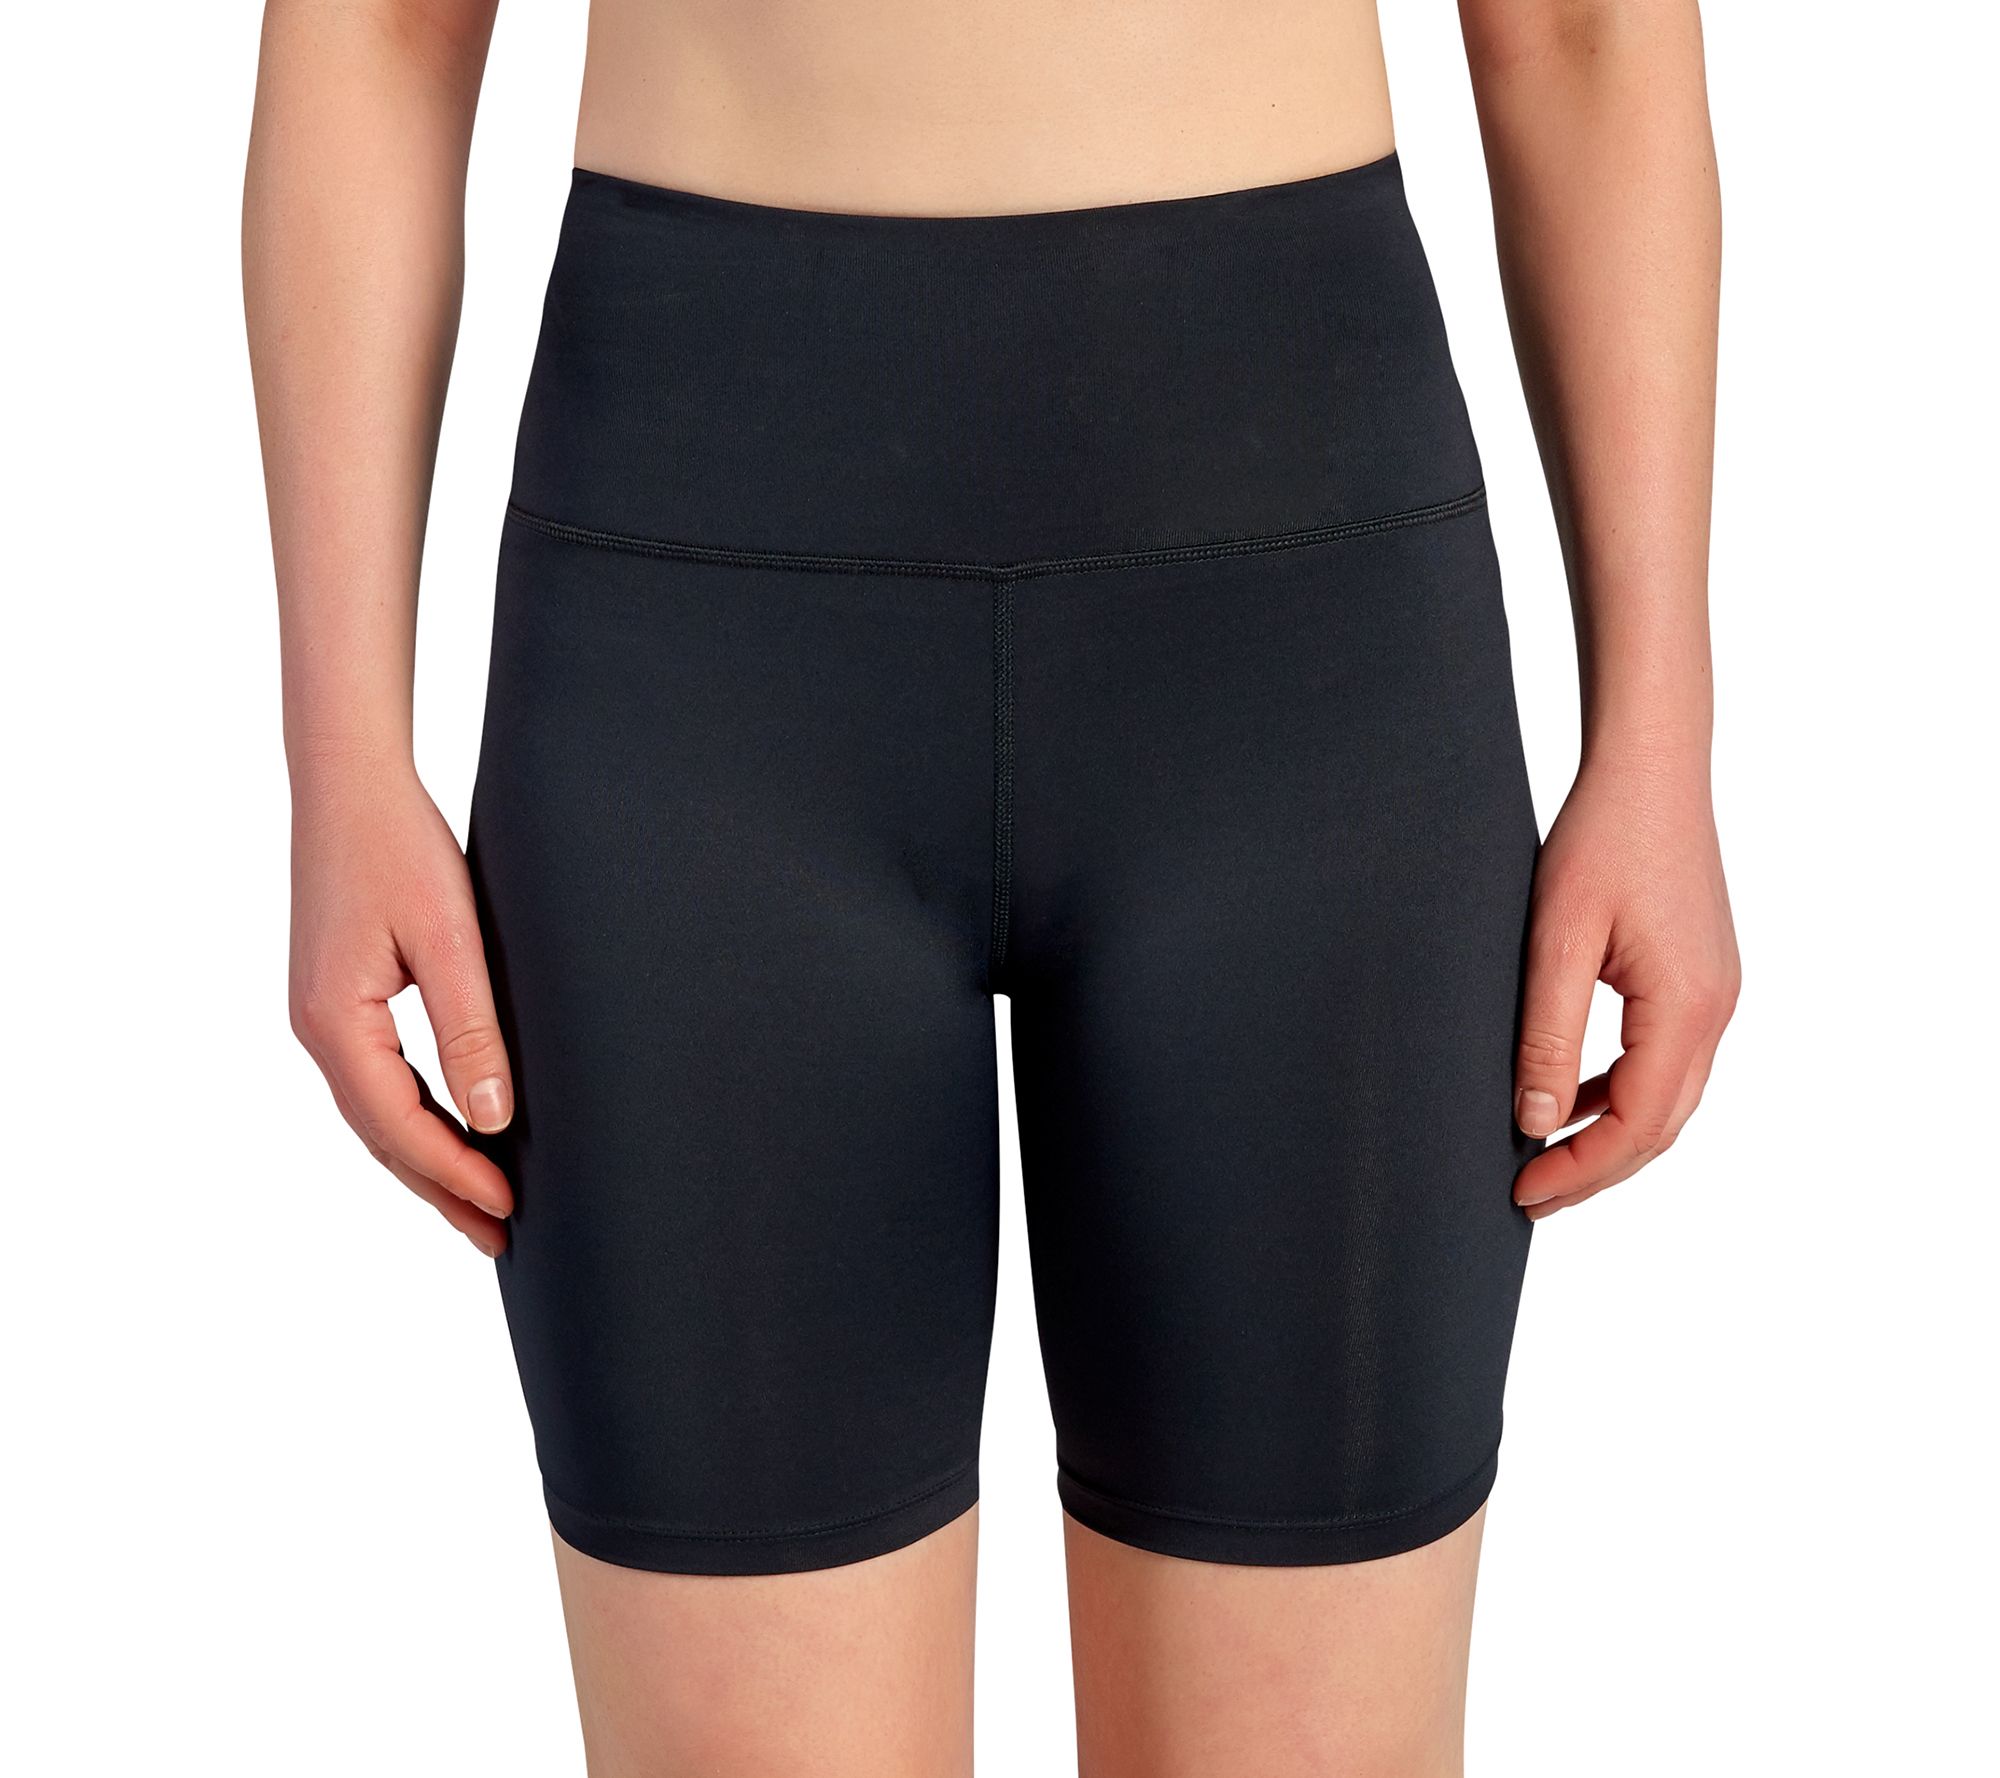 Tommie Copper Women's Pro-Grade Lower Back Support Shorts I Breathable,  Compression Support for Low Back Muscle Support